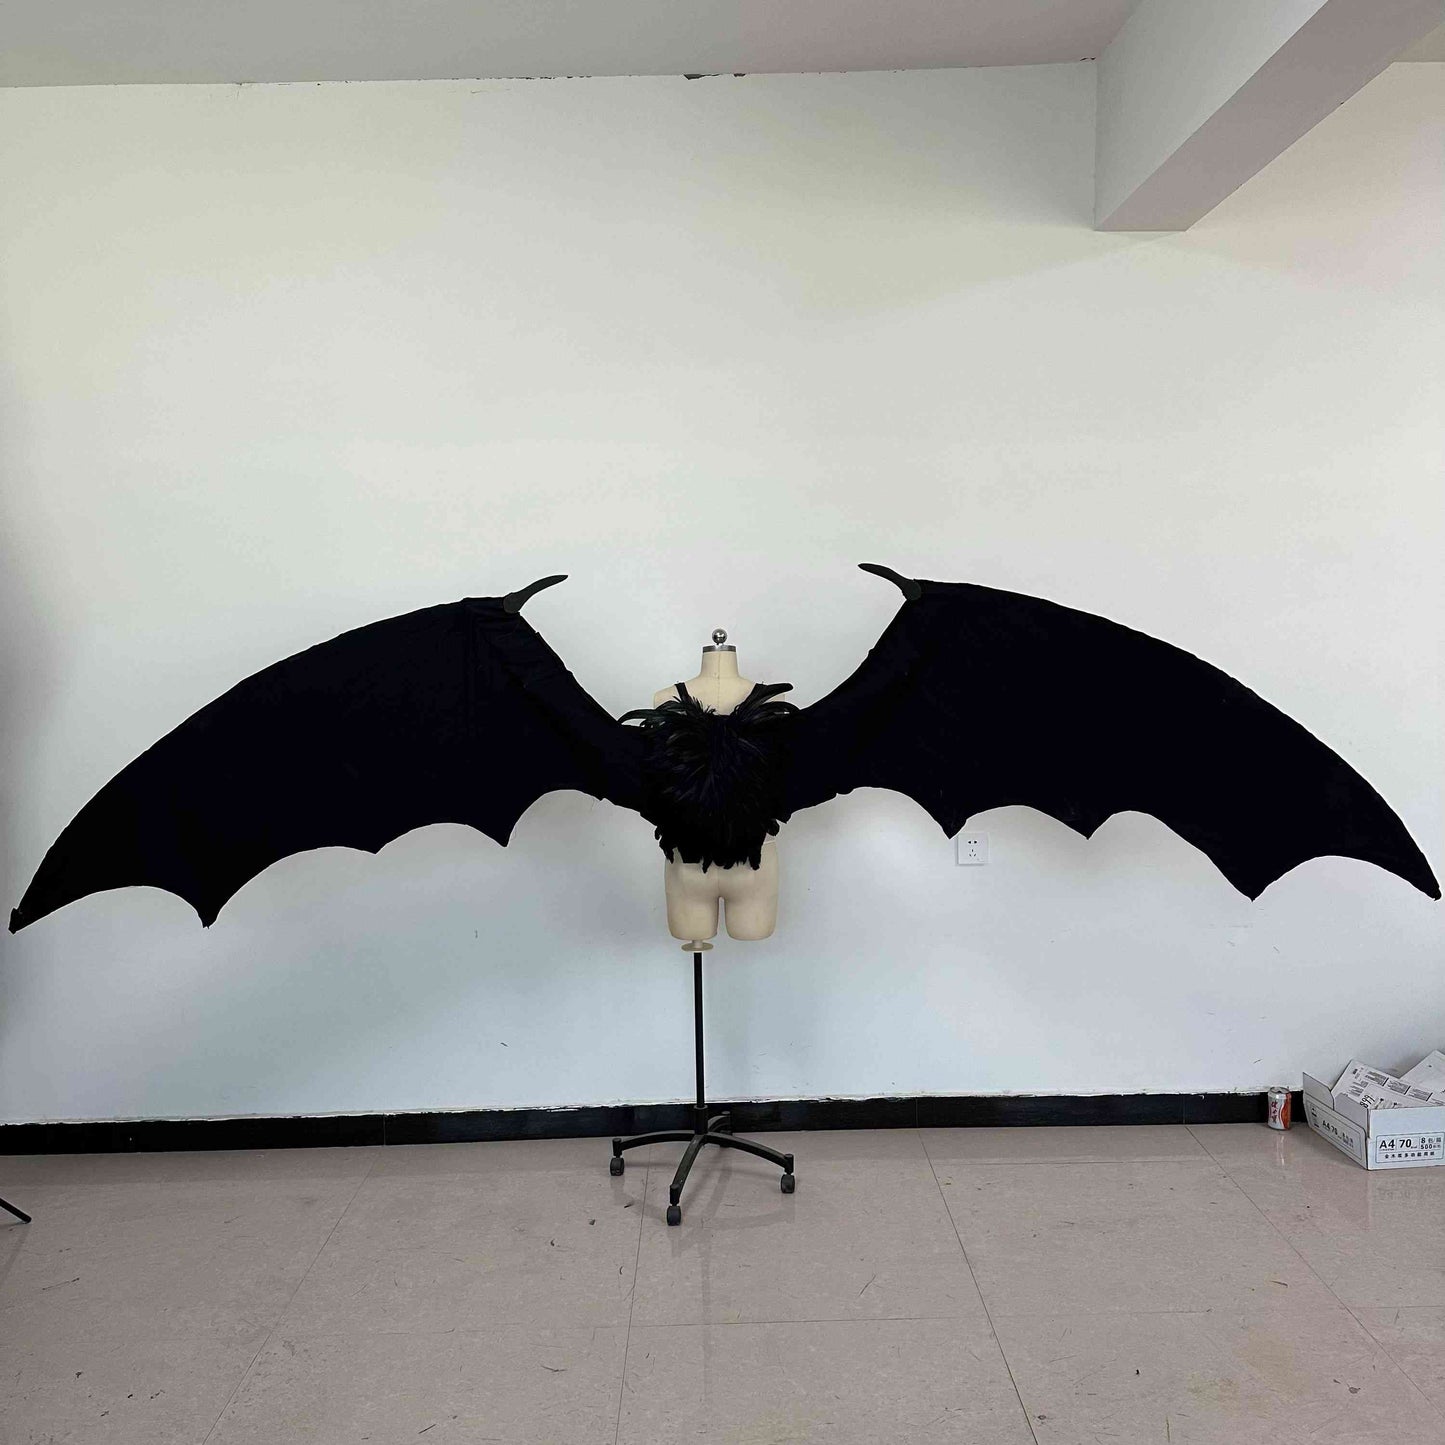 Our large black color devil wings from the back. Wings are moveable and can control extension and folding remotely. Made from aluminum alloy and cloth. Wings for fallen angel costume or devil costume. Suitable for fantasy photoshoots or events.